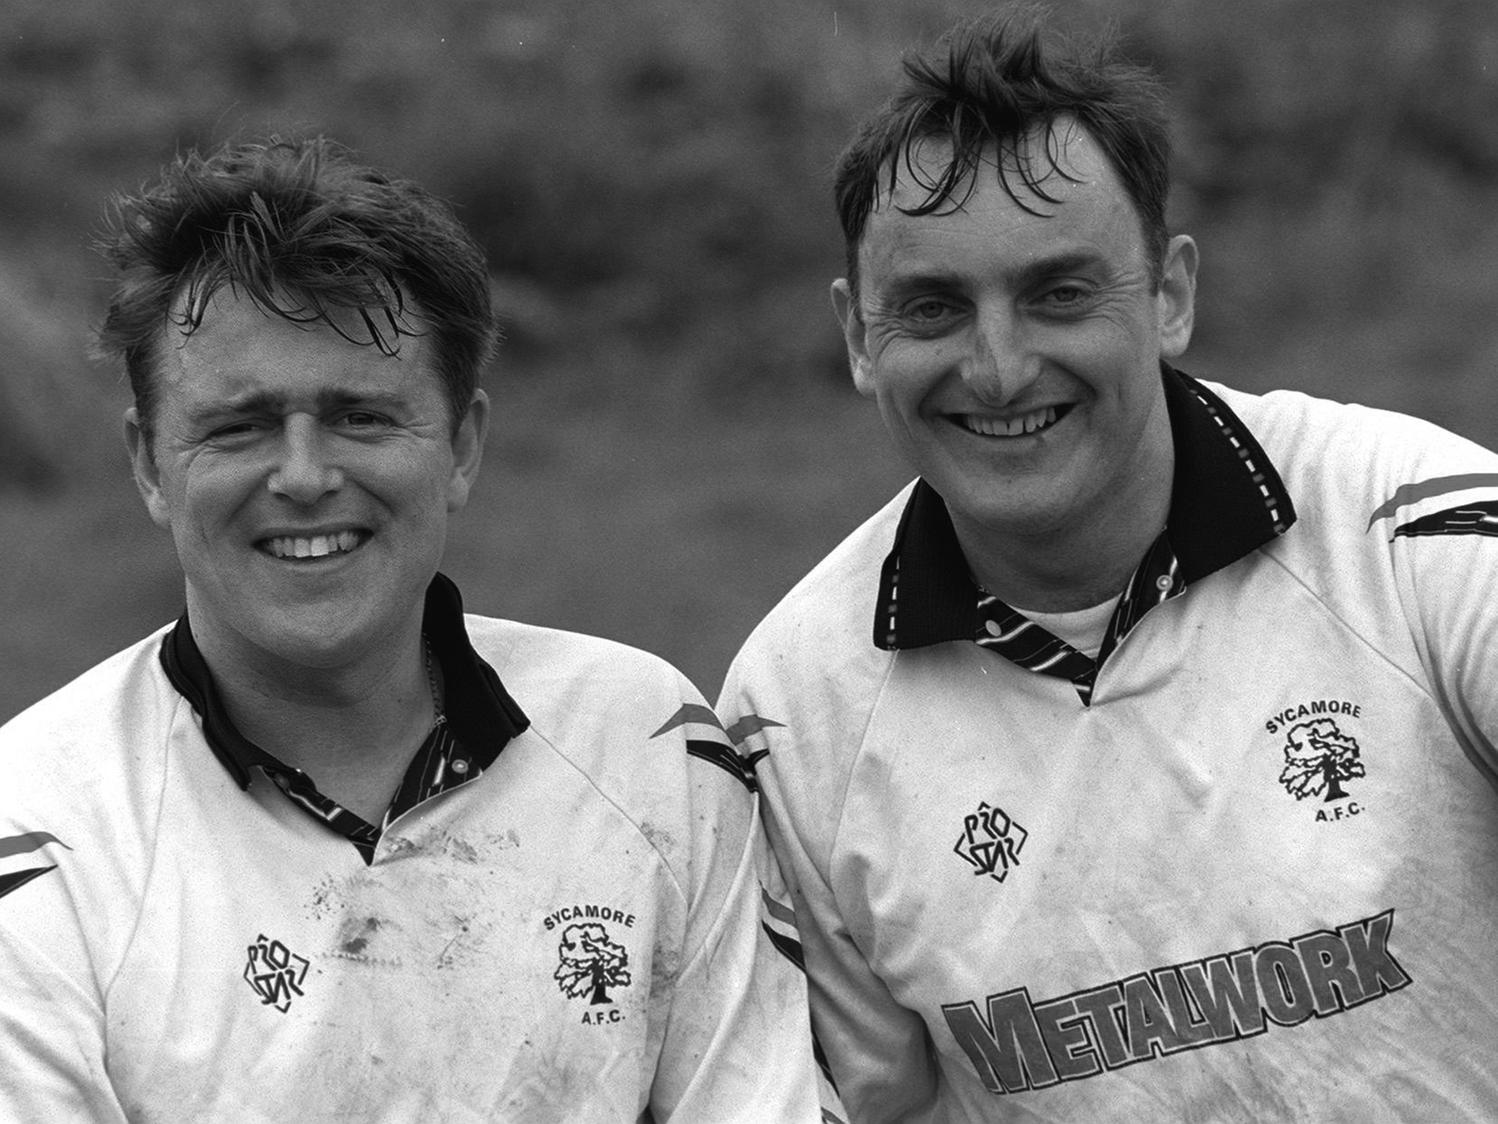 Winning smiles from Duane Percival, and Gary Woolven of Morley Mercantile after they had scored the goals in the 2-0 victory against Horse and Groom.